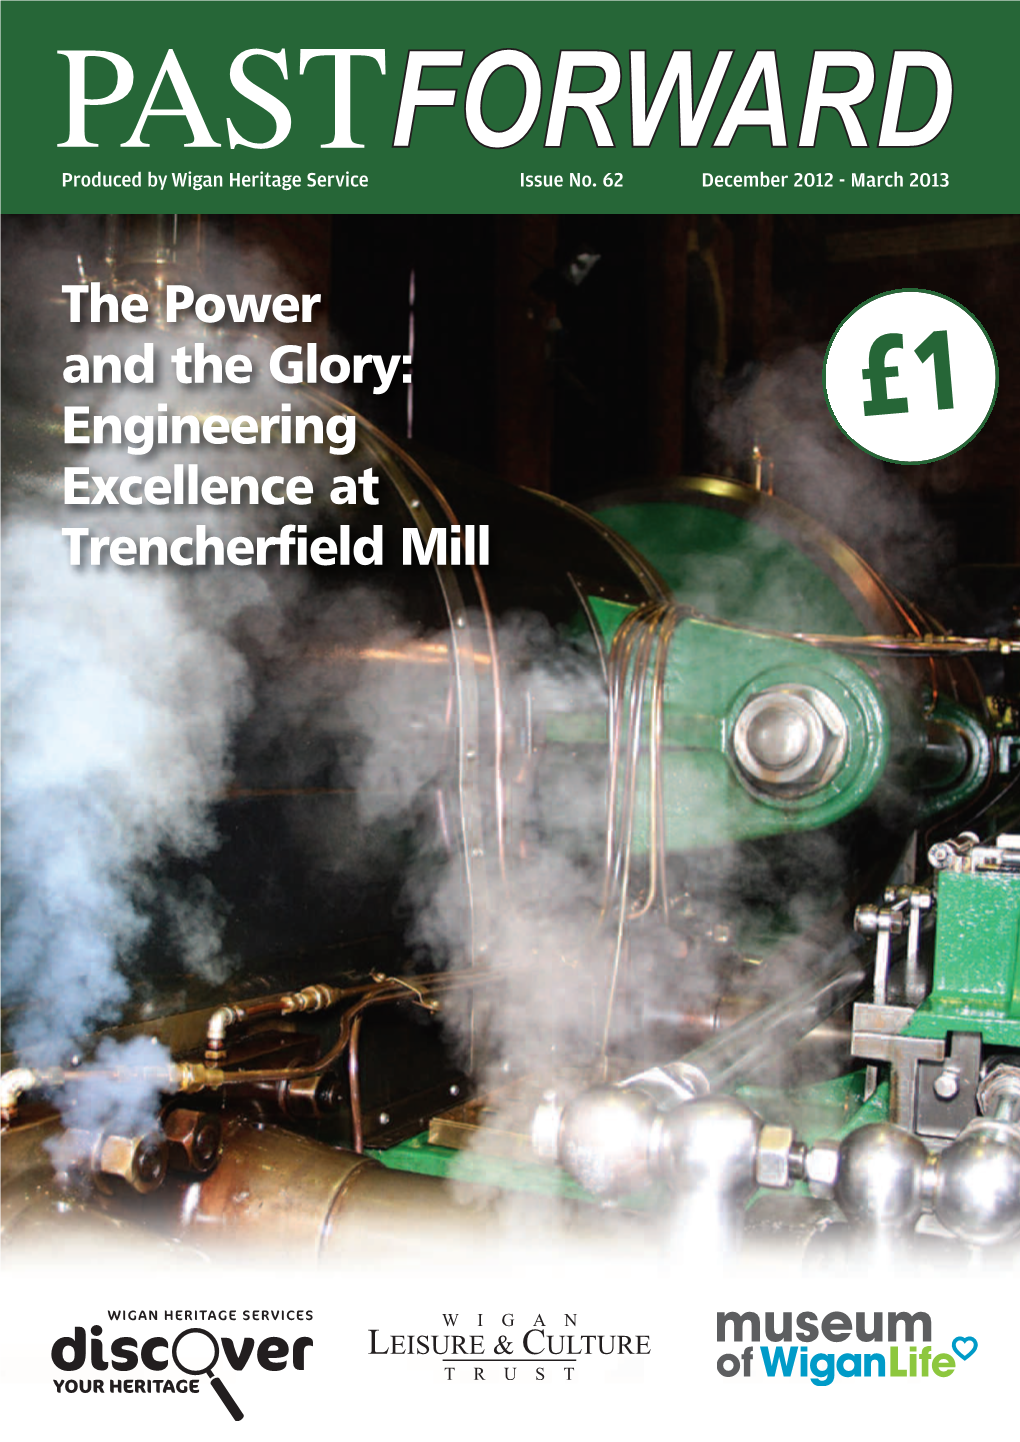 The Power and the Glory: Engineering Excellence at Trencherfield Mill